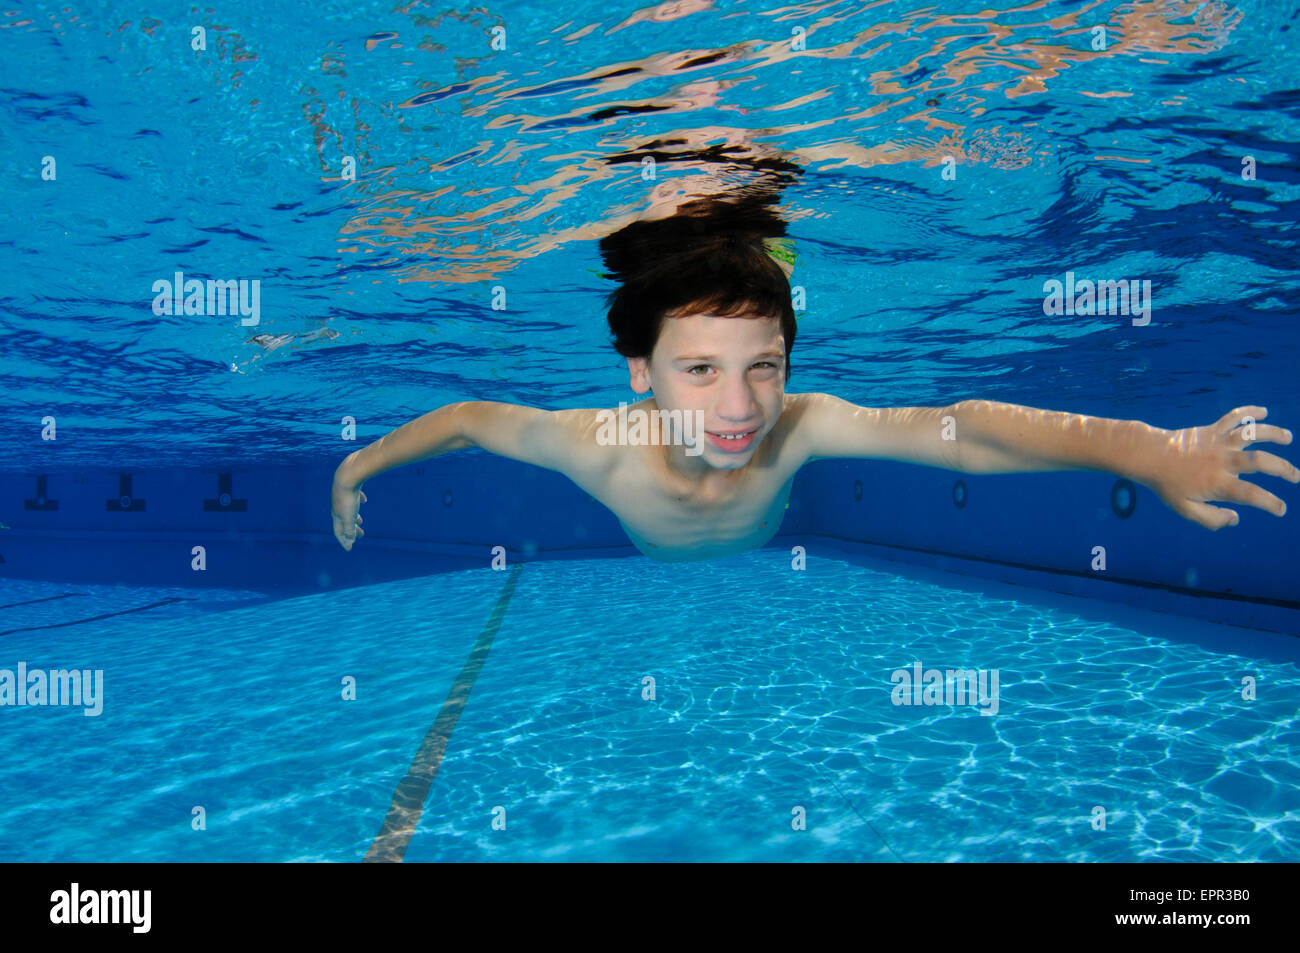 Young boy holds her breath while swimming underwater Stock Photo